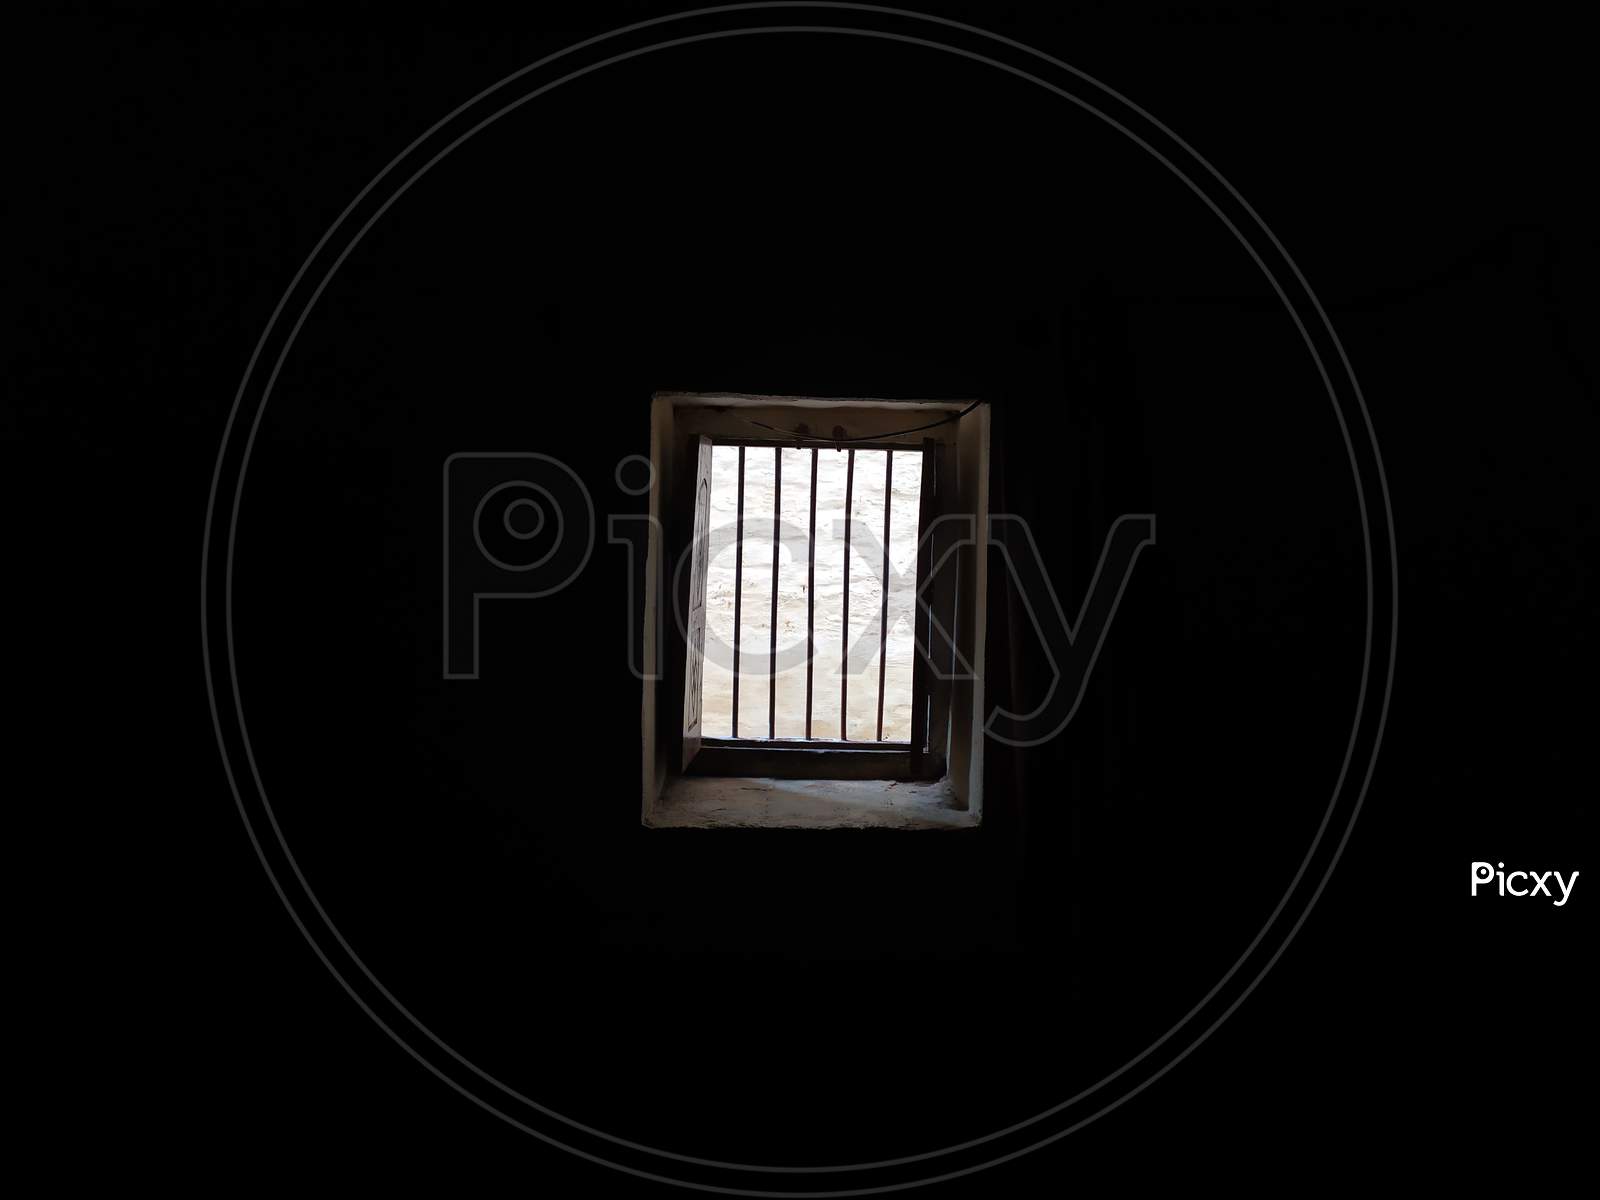 A WINDOW IS OPEN IN DARK ROOM AND LIGHT IS COMING FROM OUT SIDE